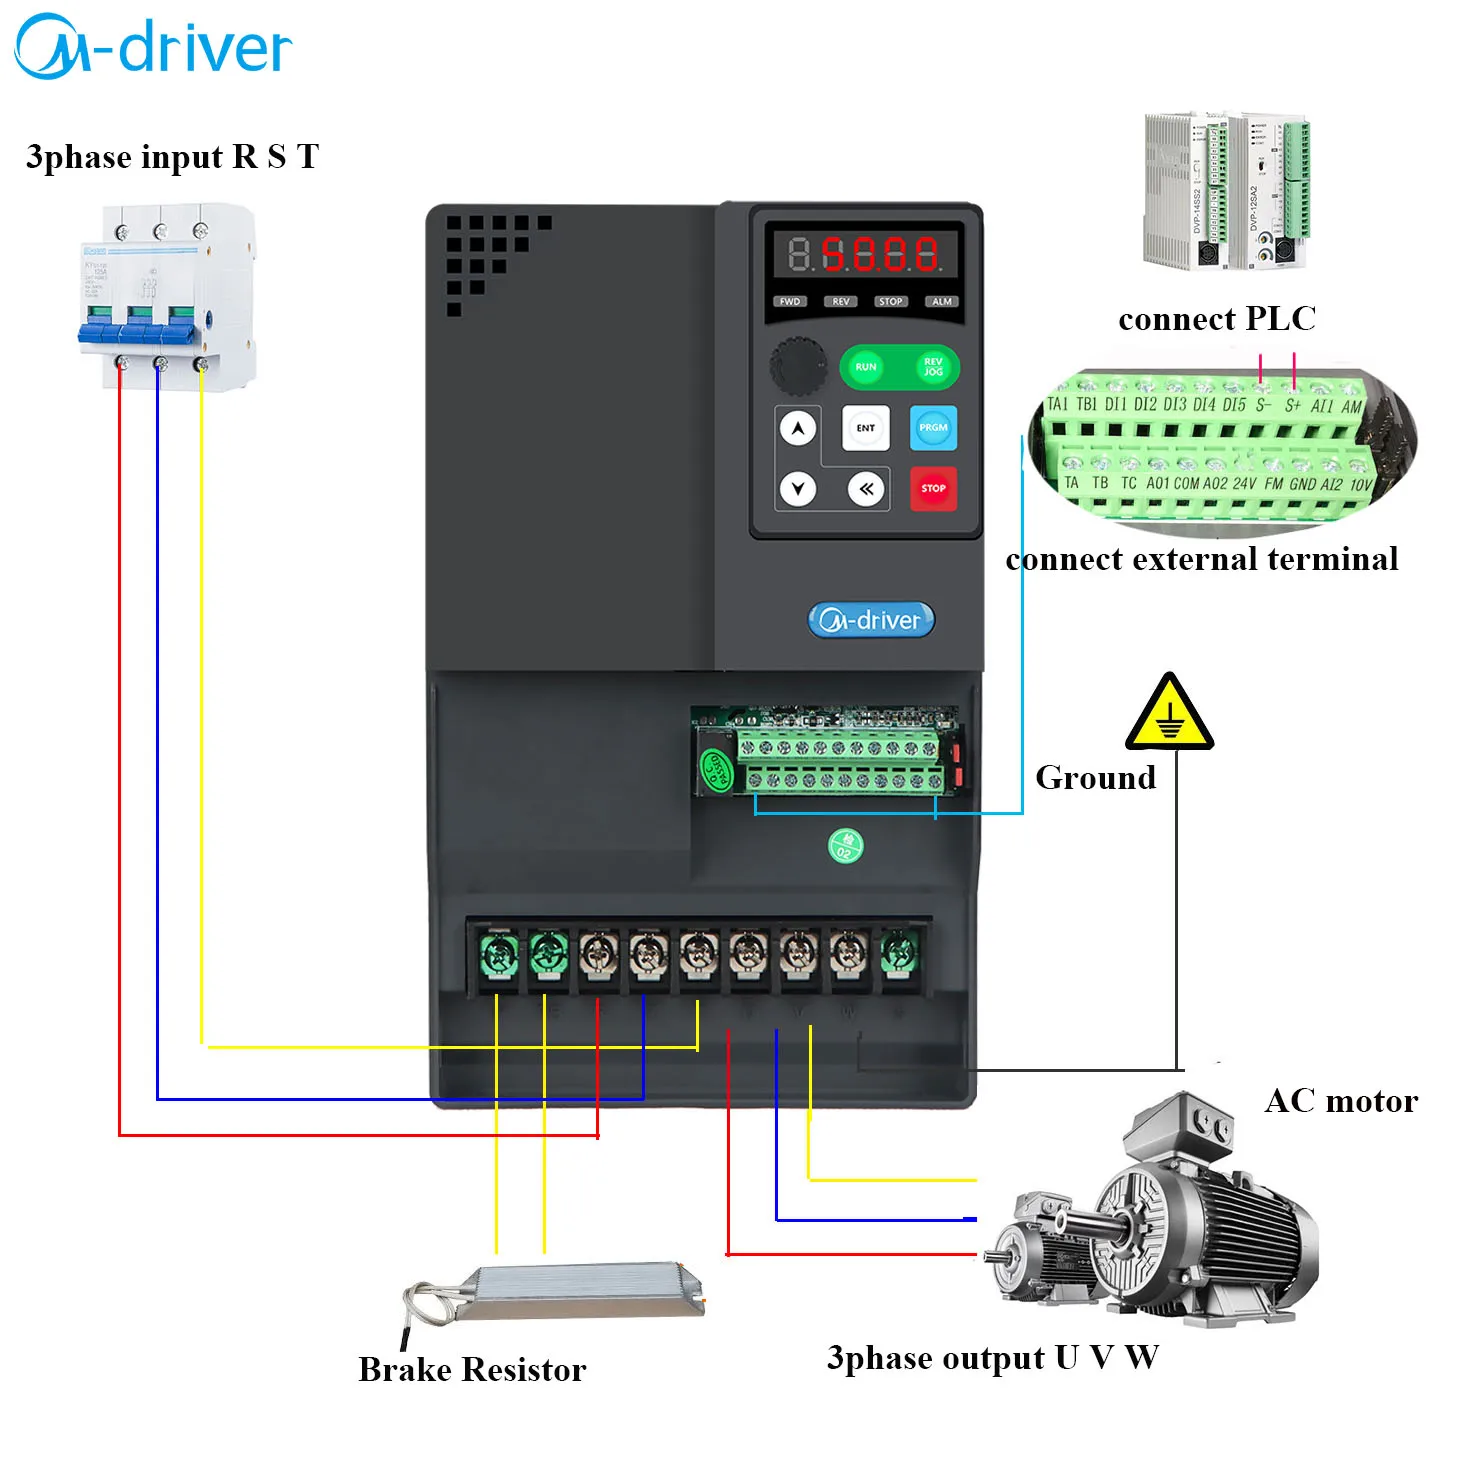 SINGLE PHASE TO 3 PHASE MOTOR INVERTER VFD SPEED CONTROLLER 